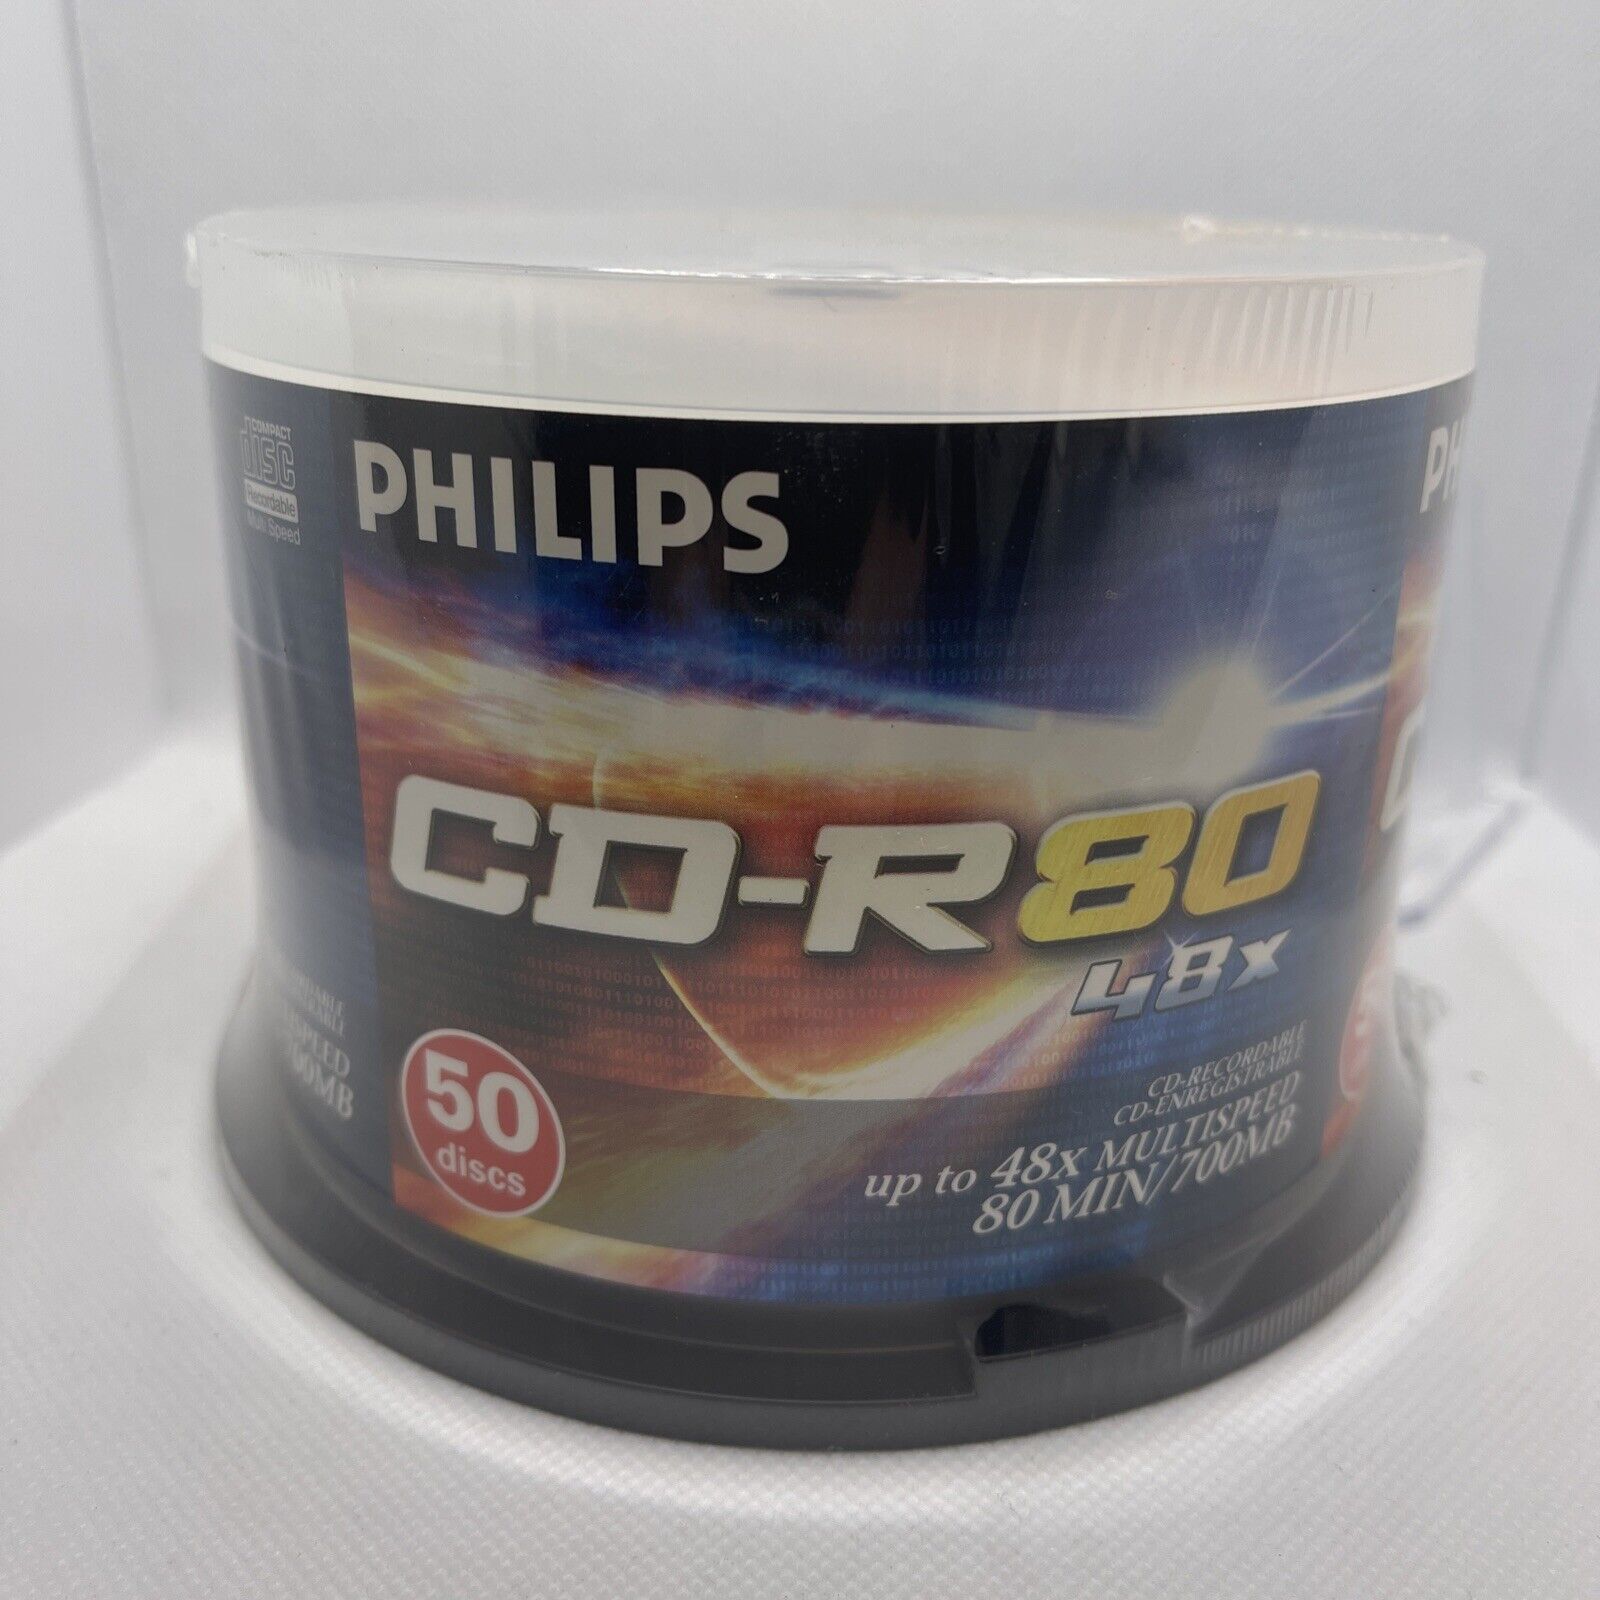 Philips Blank 50 Discs CD-R 80 52x Recordable 700MB 80min NEW Sealed